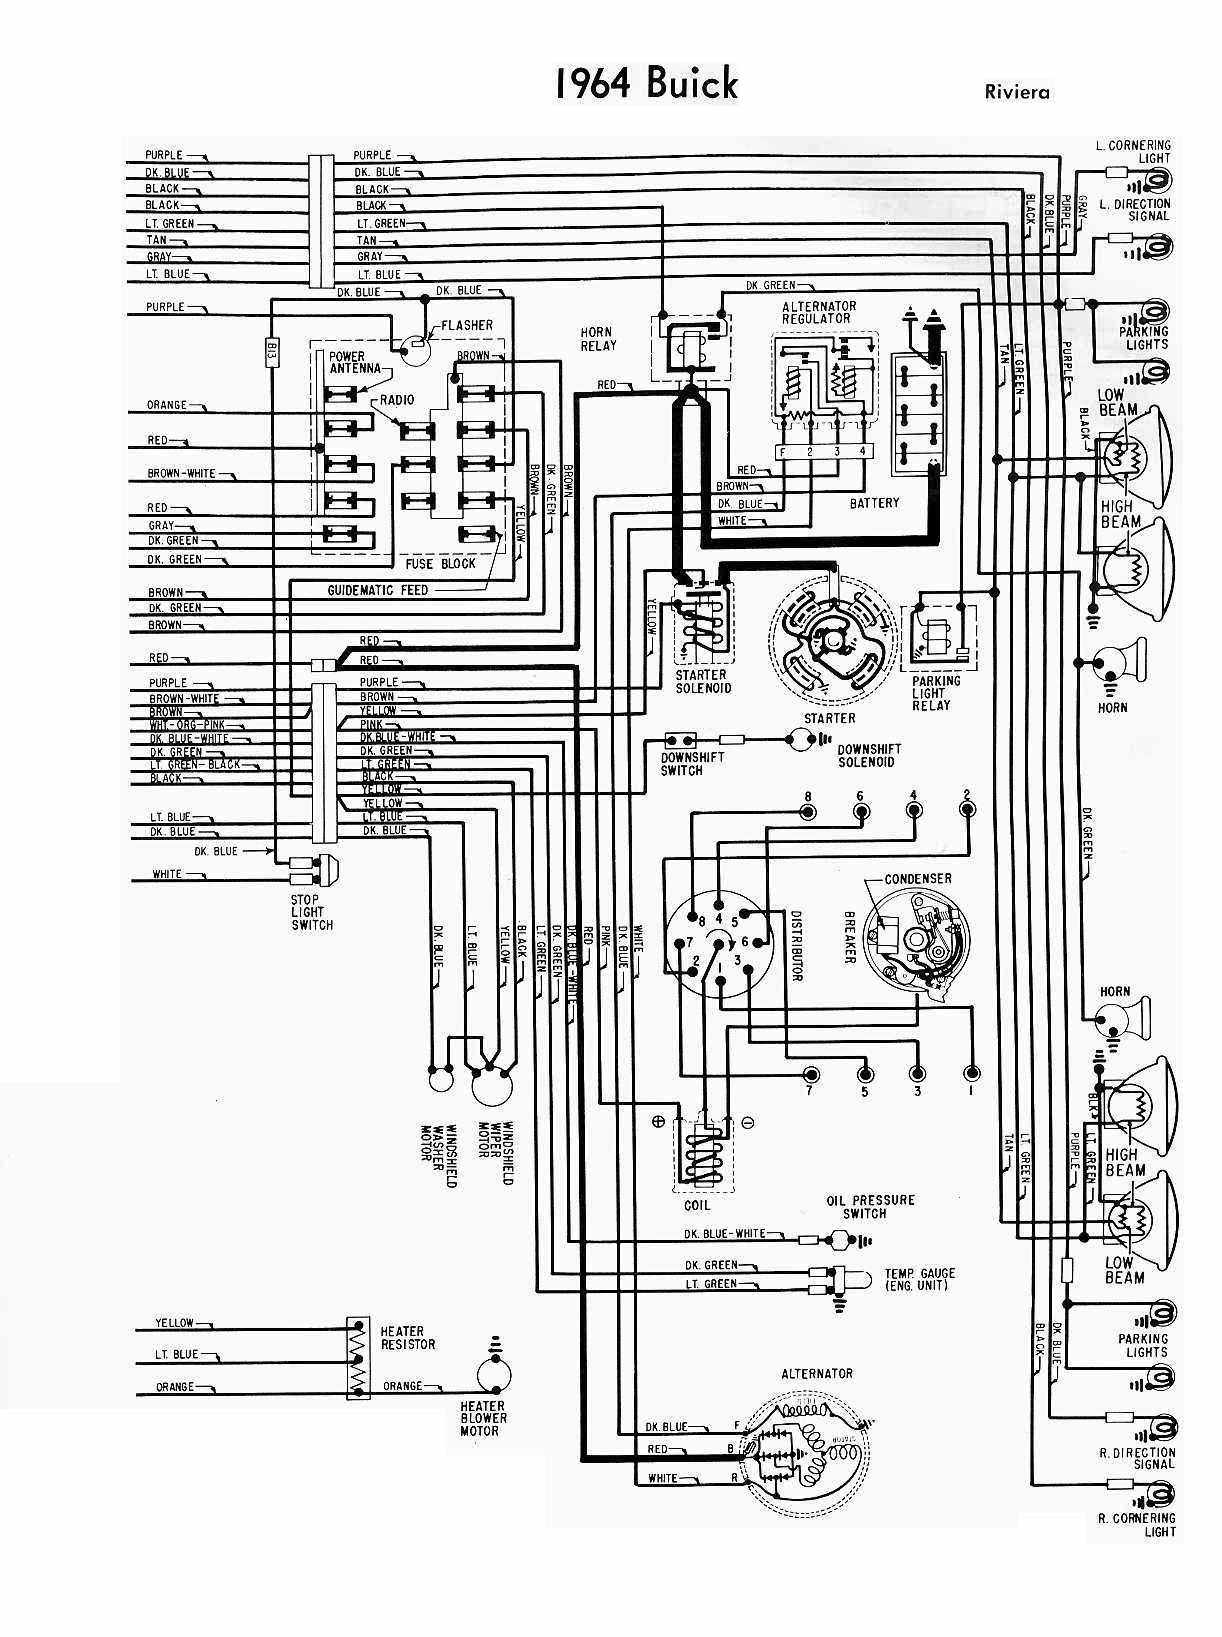 1990 Buick LeSabre Electra Park Avenue Electrical Systems Wiring Manual 